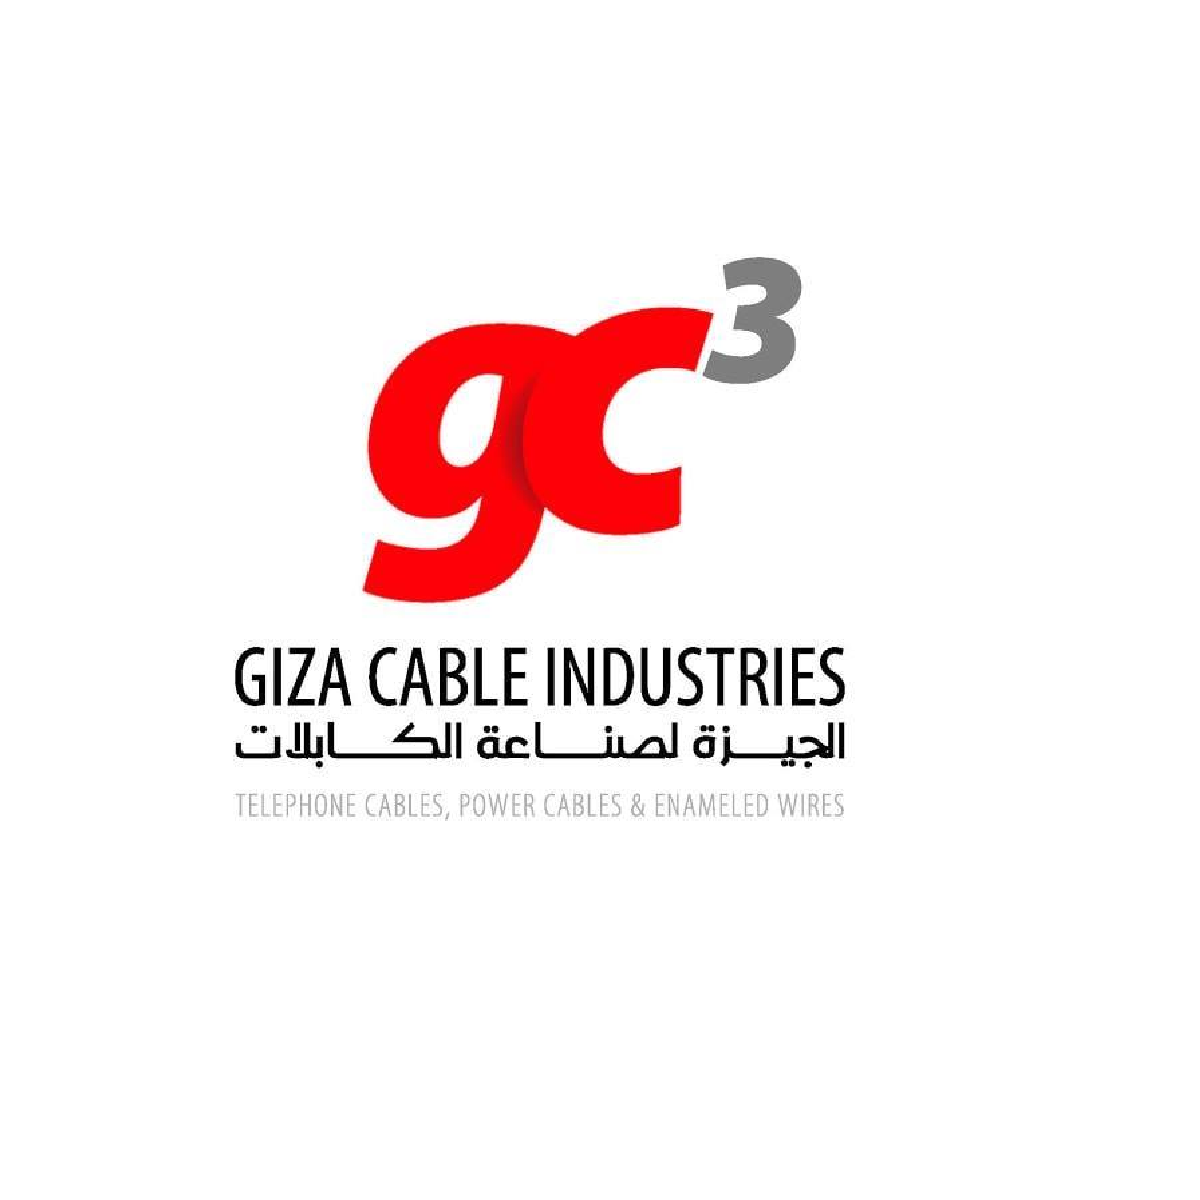 Giza Cables Industries